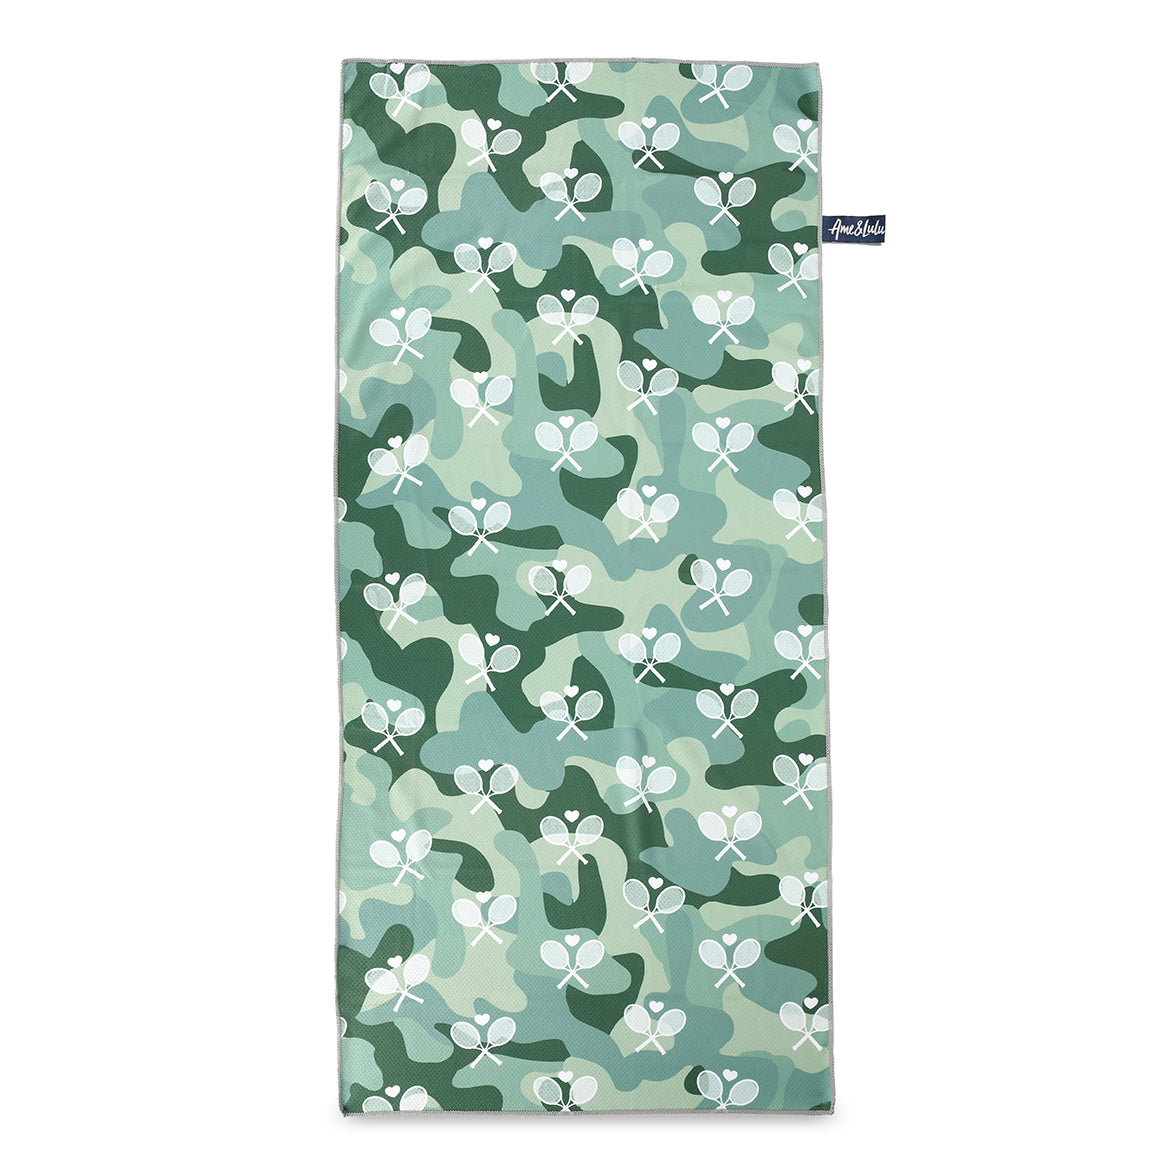 rectangular towel printed with olive camo and white crossed racquets.